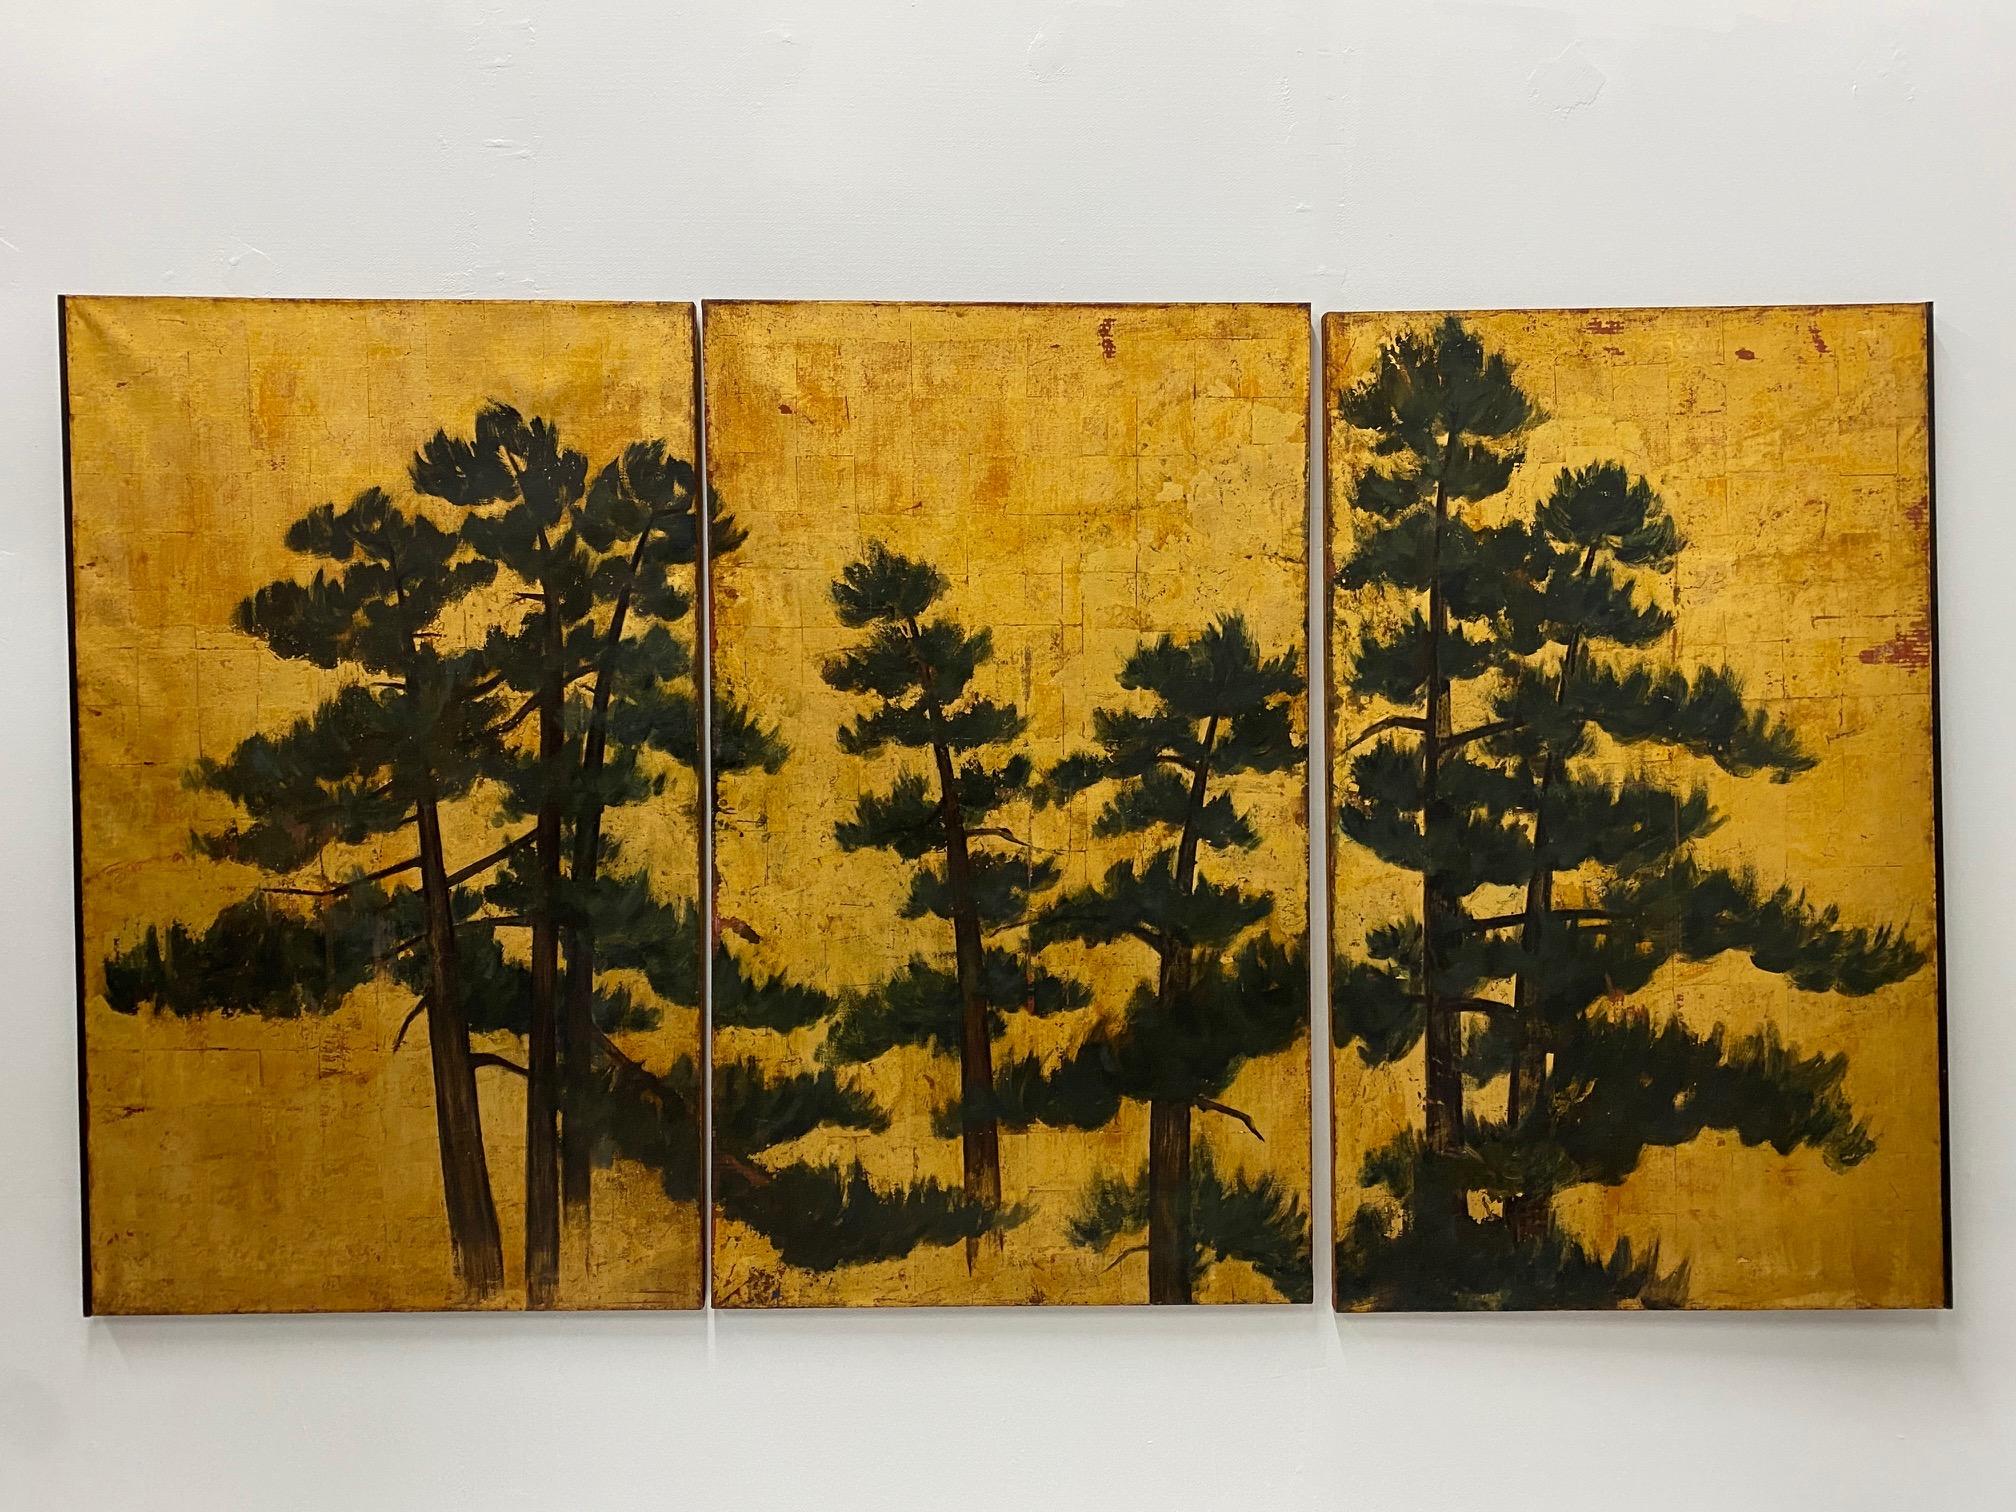 Exceptional Large 19th Century Triptych of Pine Trees Against Gold Leaf Sky 2